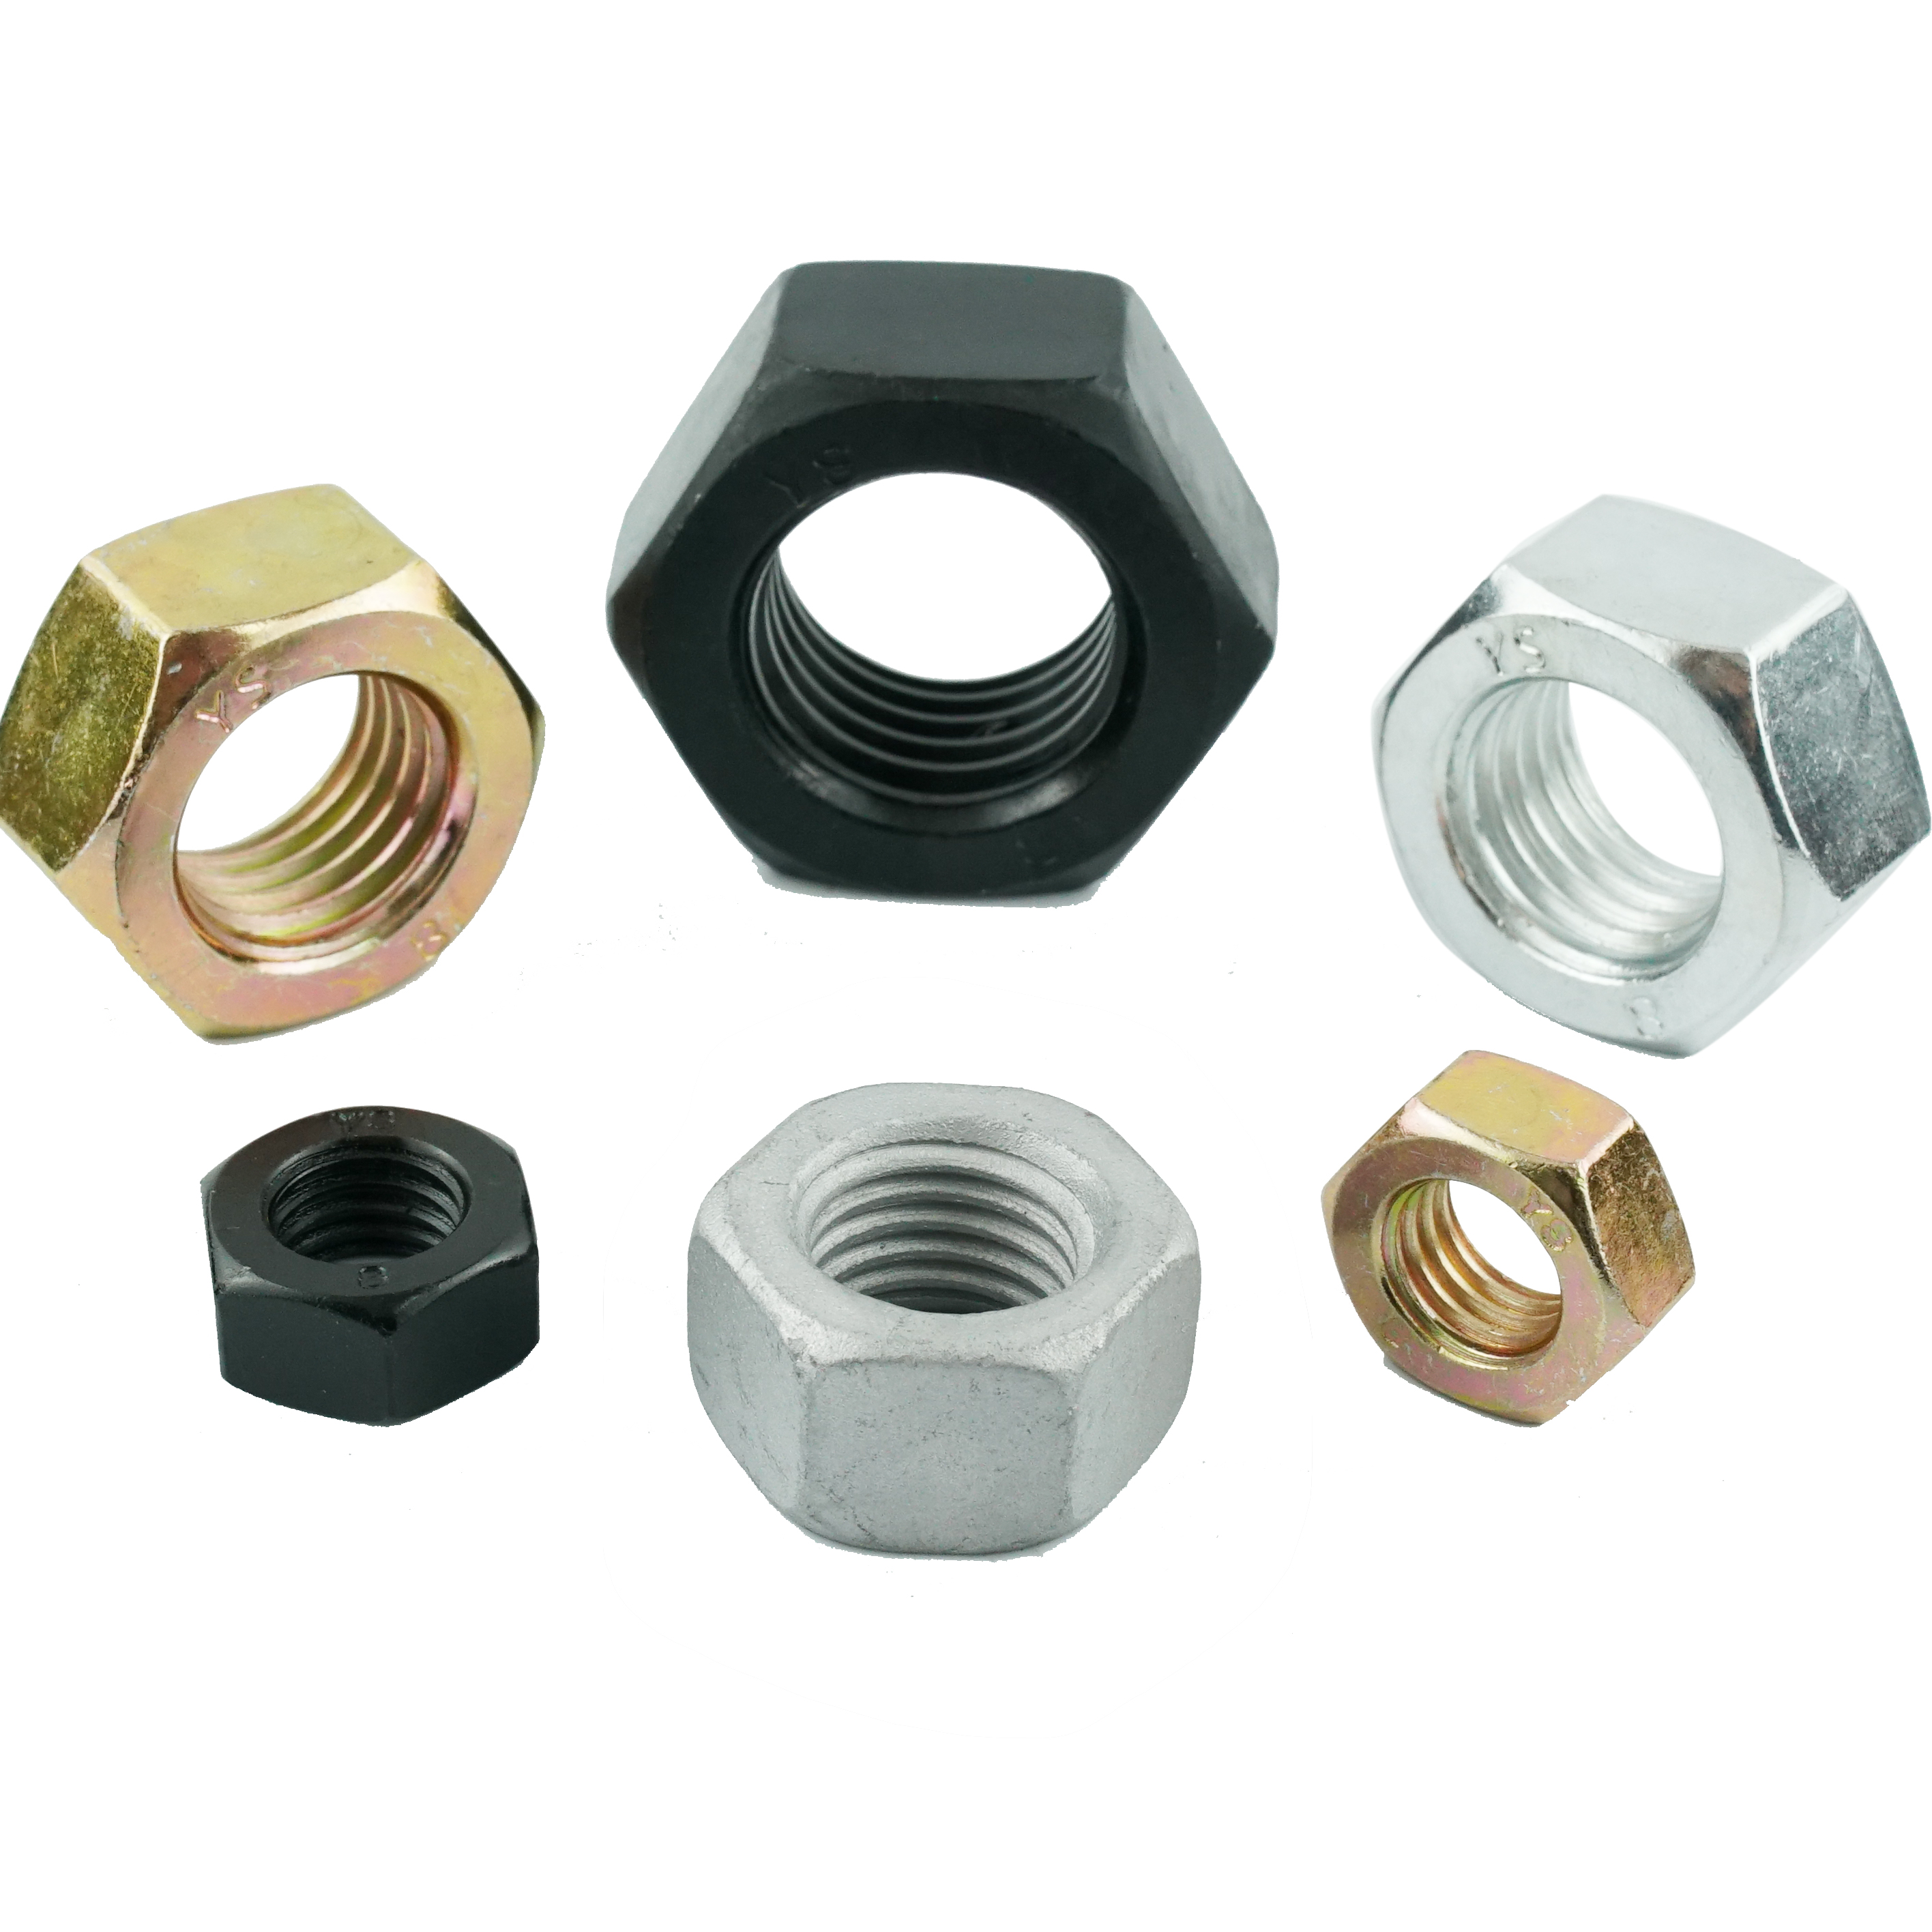 New line of metric hex flange bolts | Fastener + Fixing Magazine